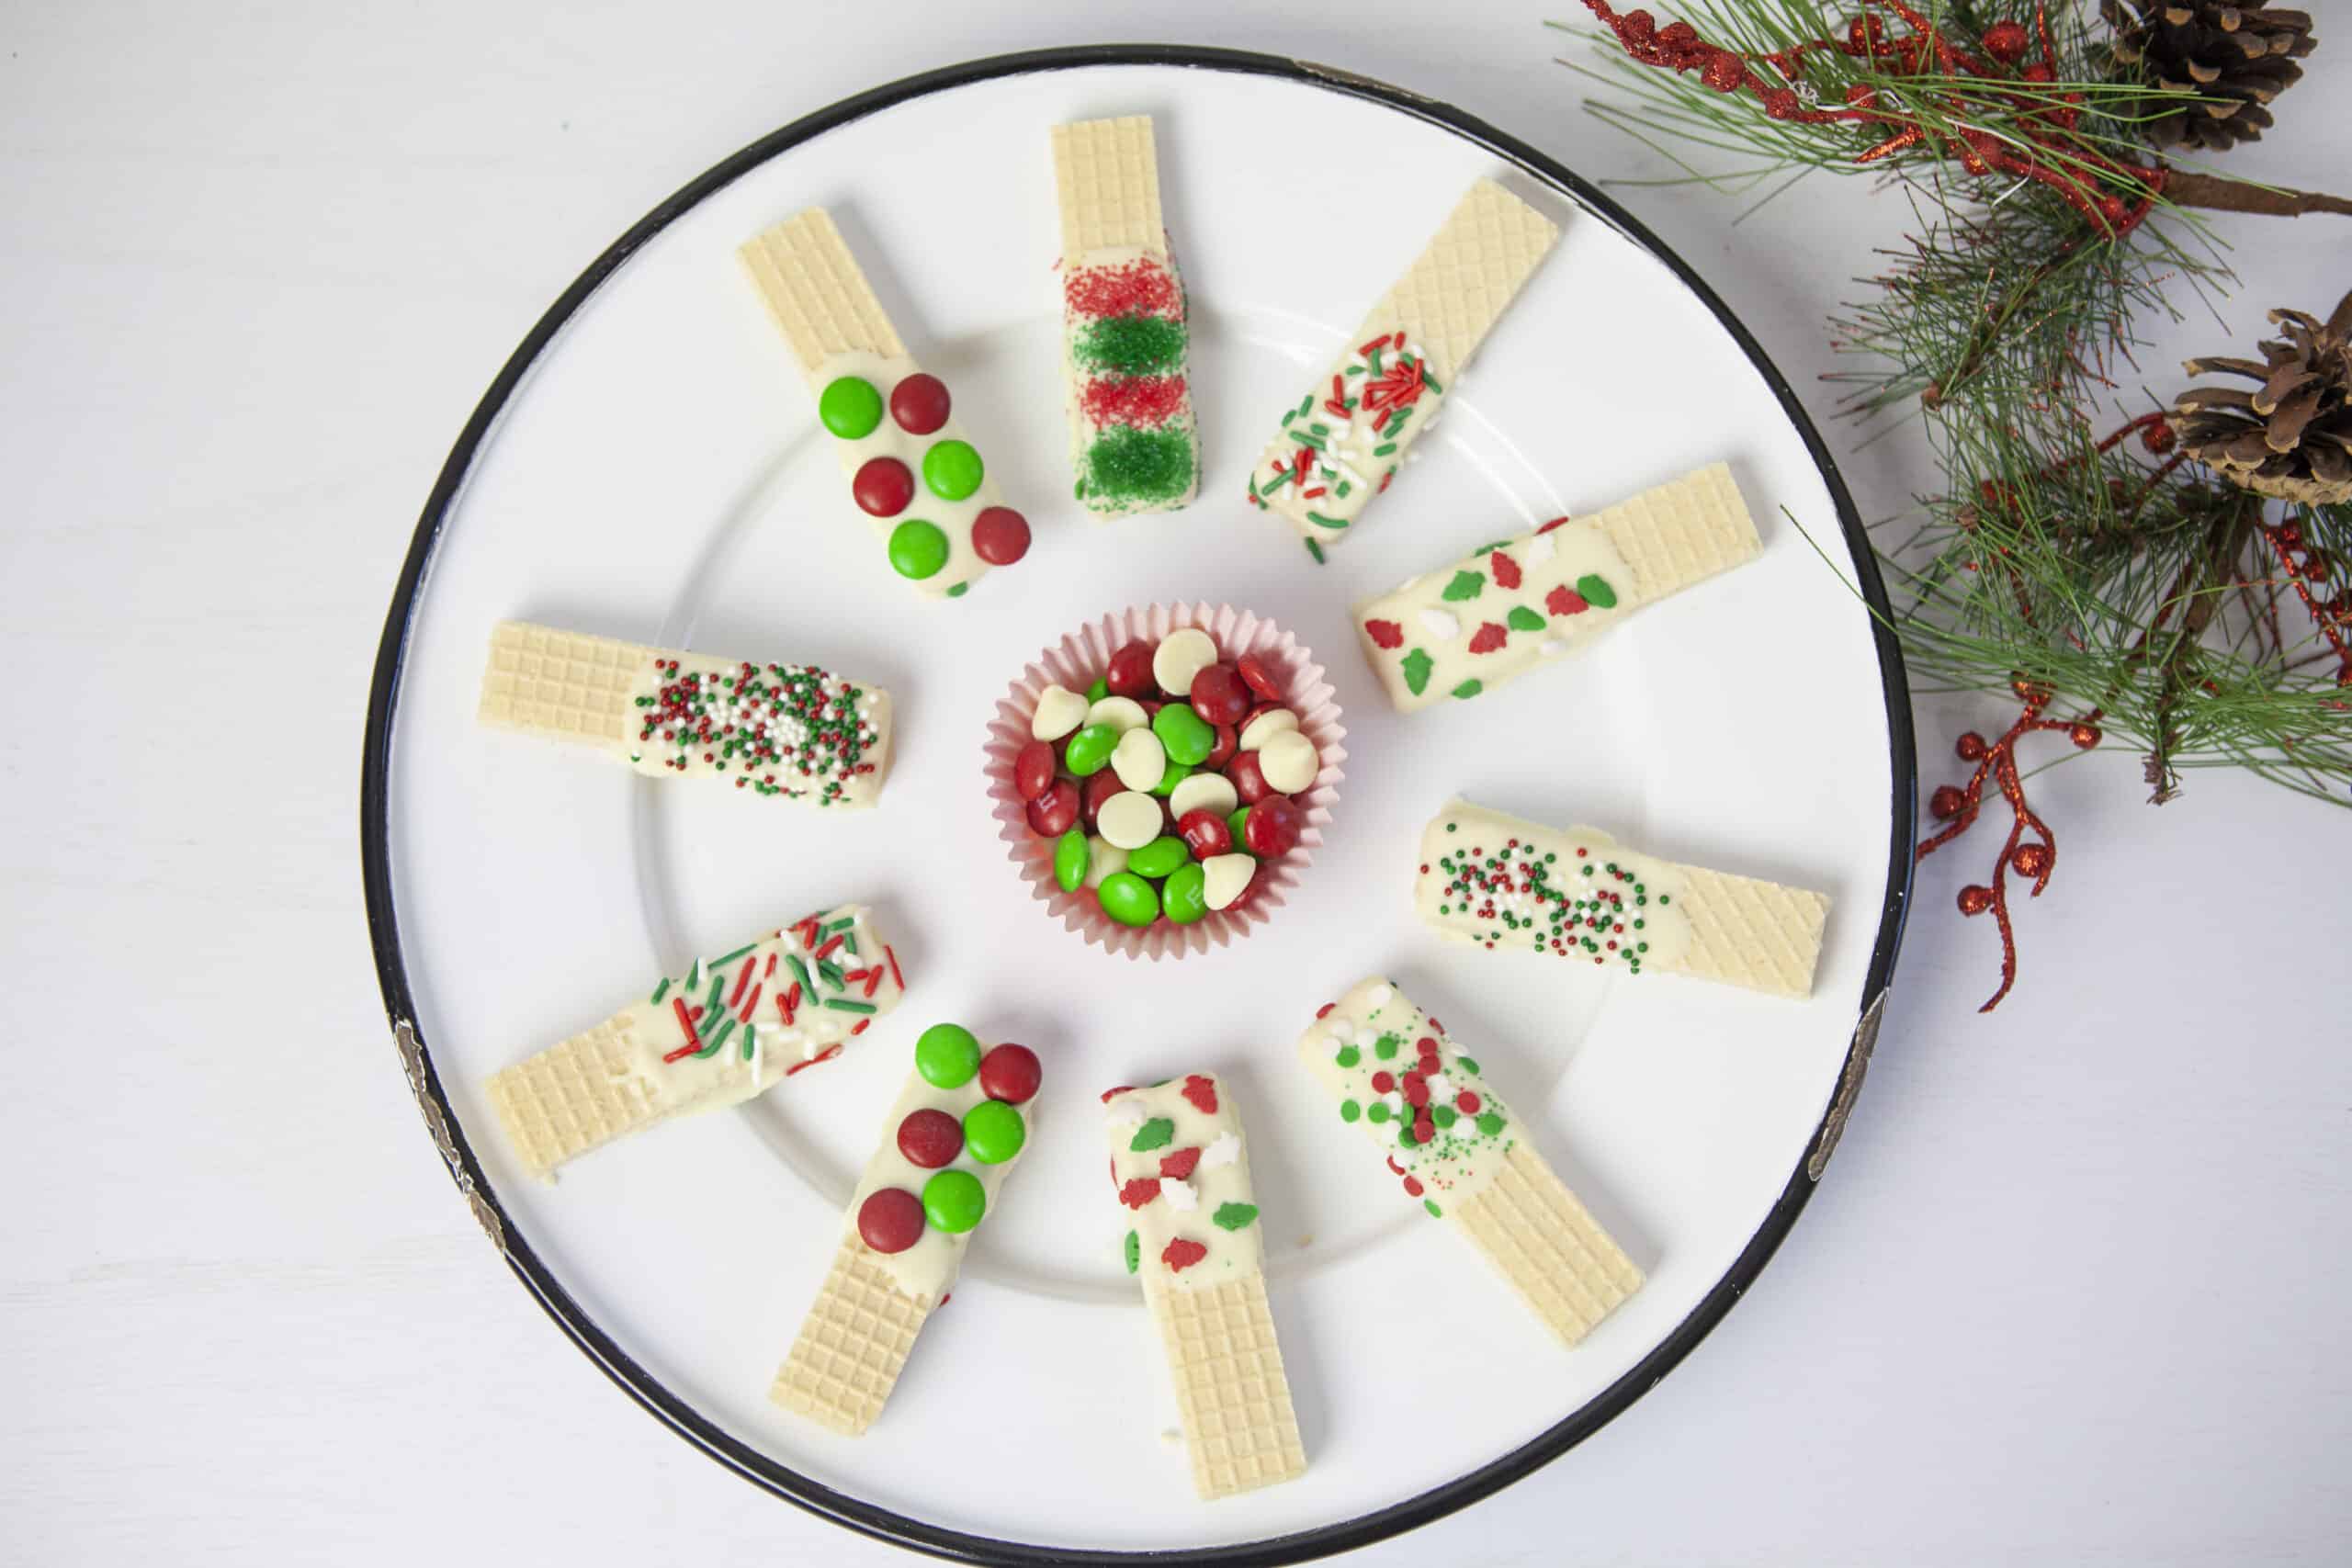 A plate with Christmas wafer cookies on it.